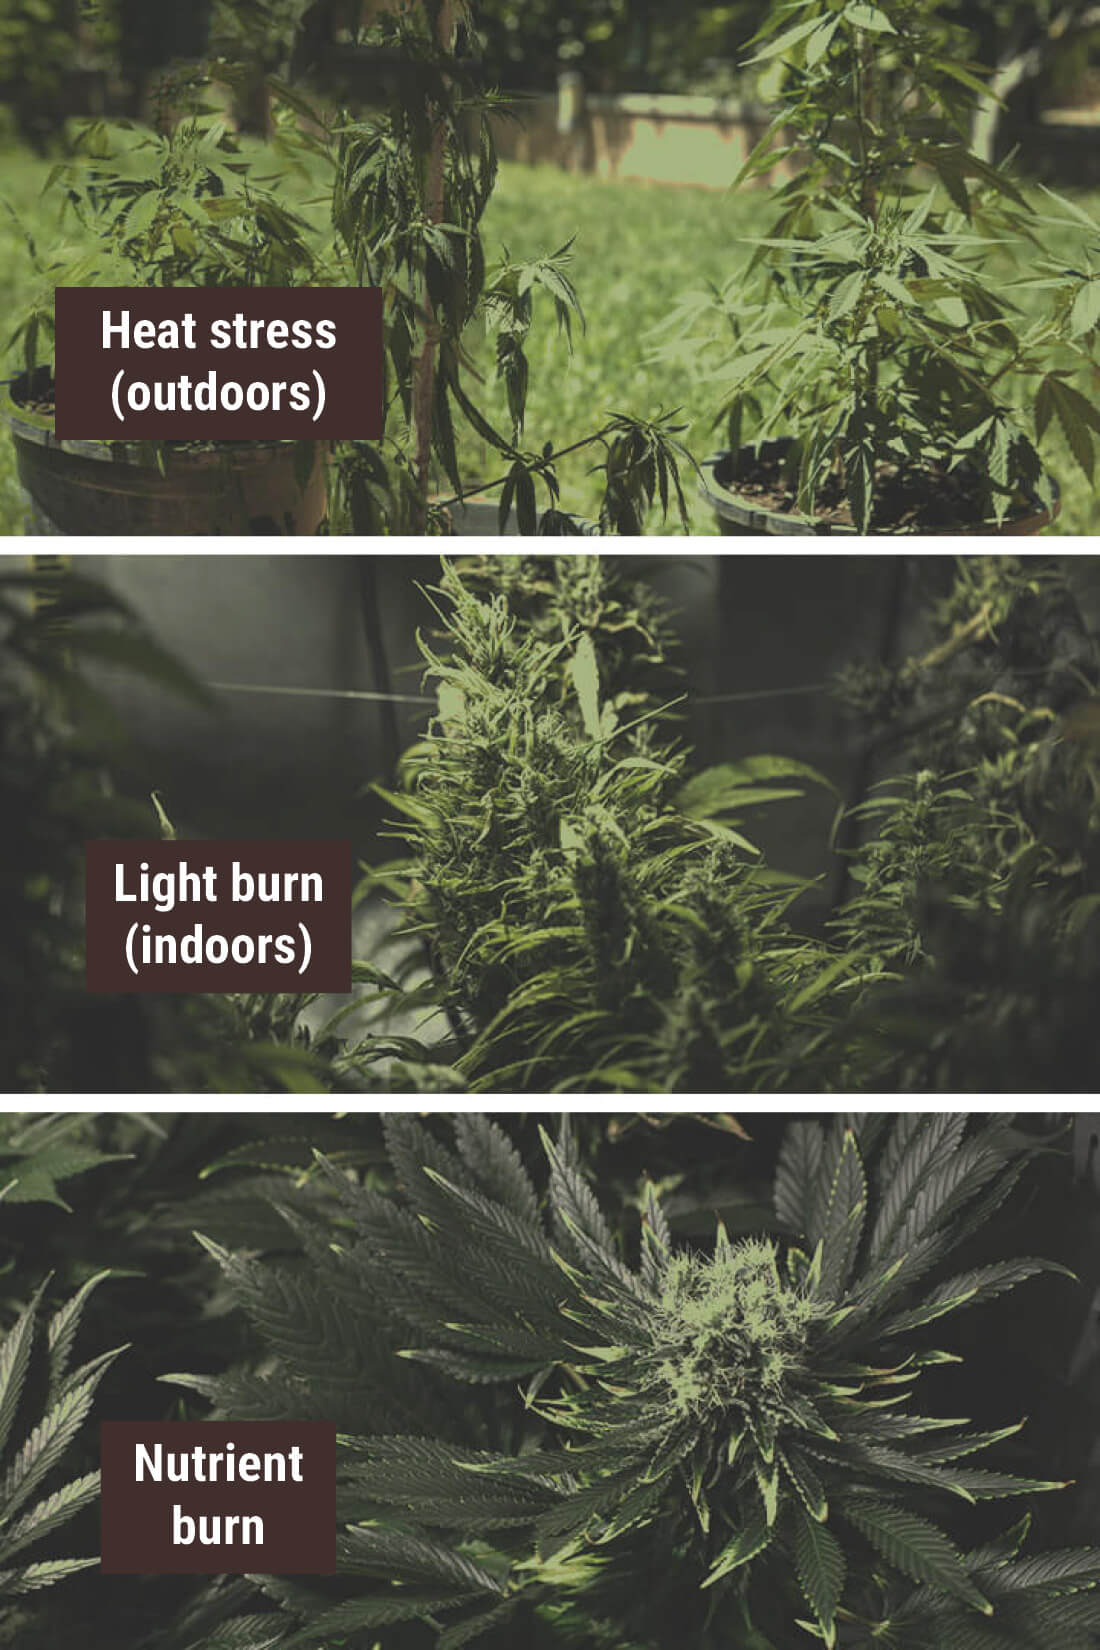 HEAT-STRESSING YOUR PLANTS